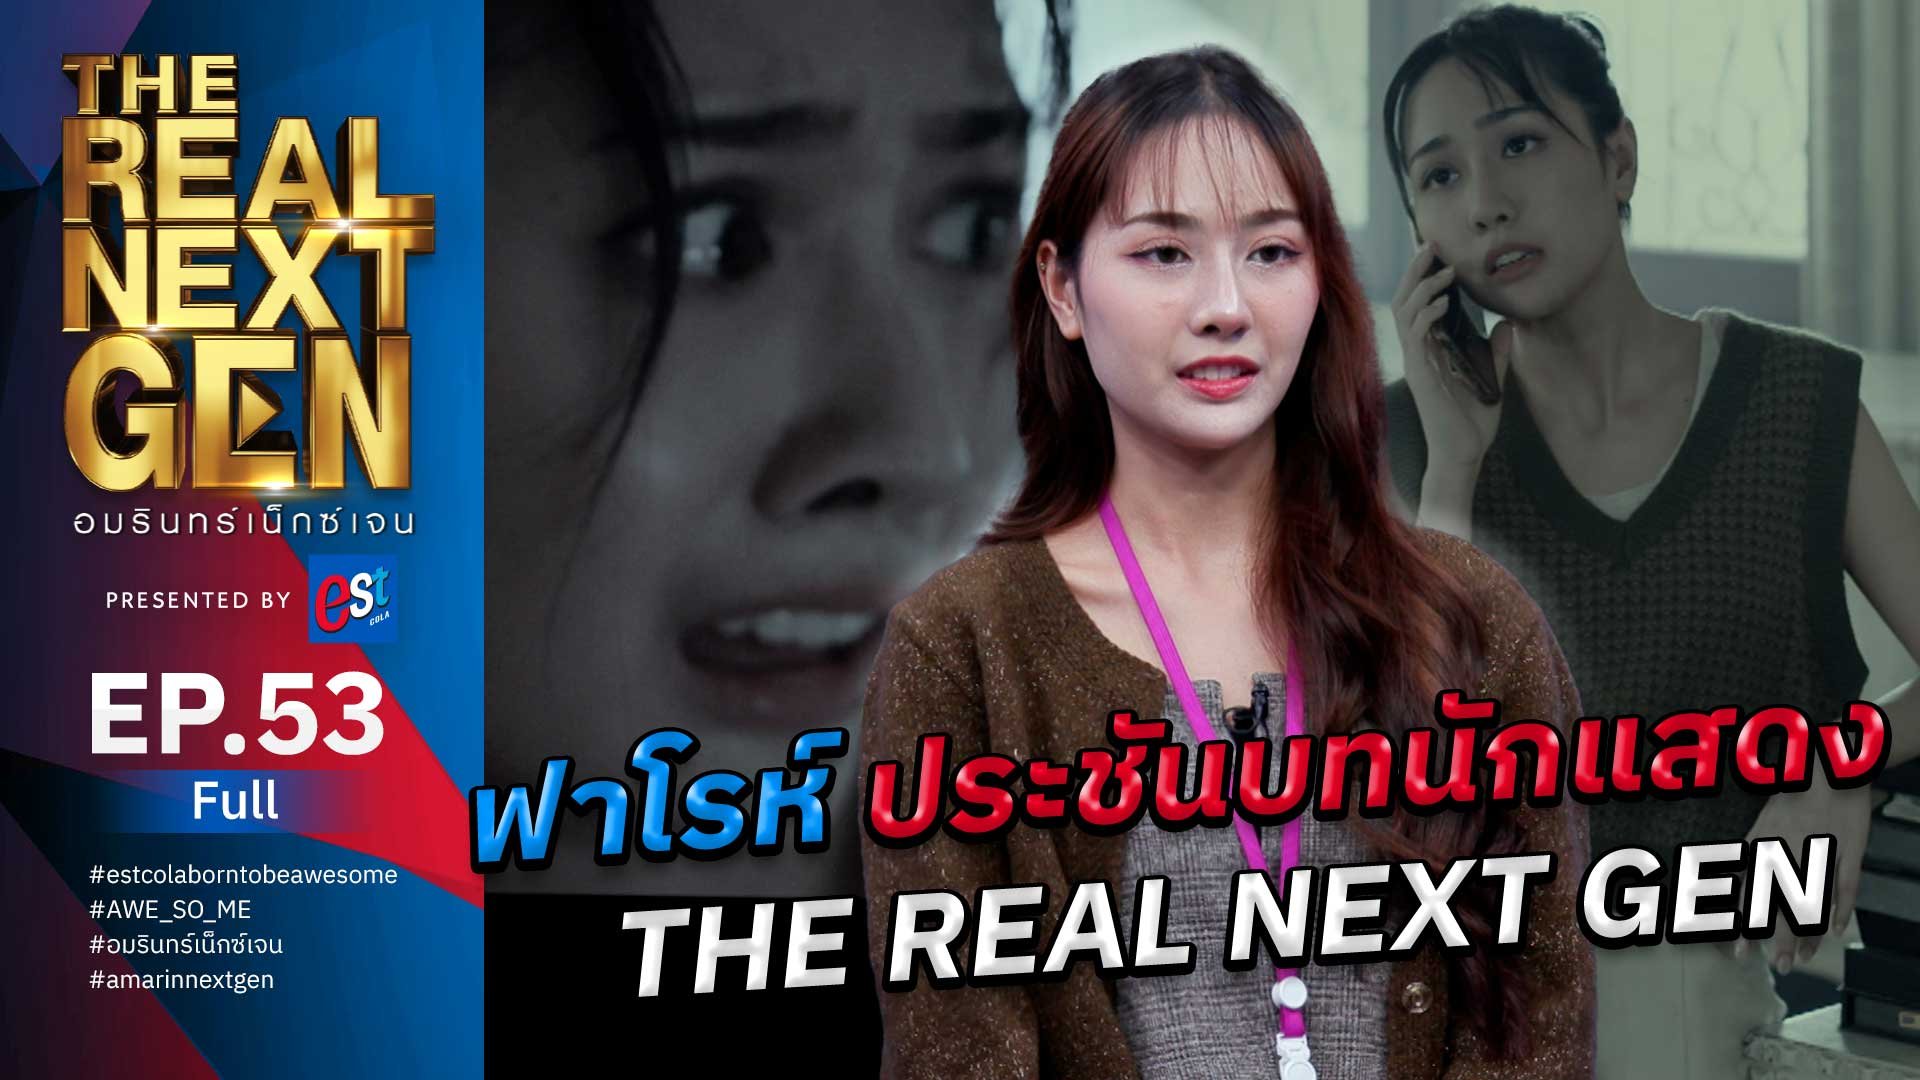 The Real Next Gen อมรินทร์เน็กซ์เจน | EP.53 THE REAL NEXT GEN อมรินทร์เน็กซ์เจน Presented By est cola  | 29 พ.ย. 66 | AMARIN TVHD34